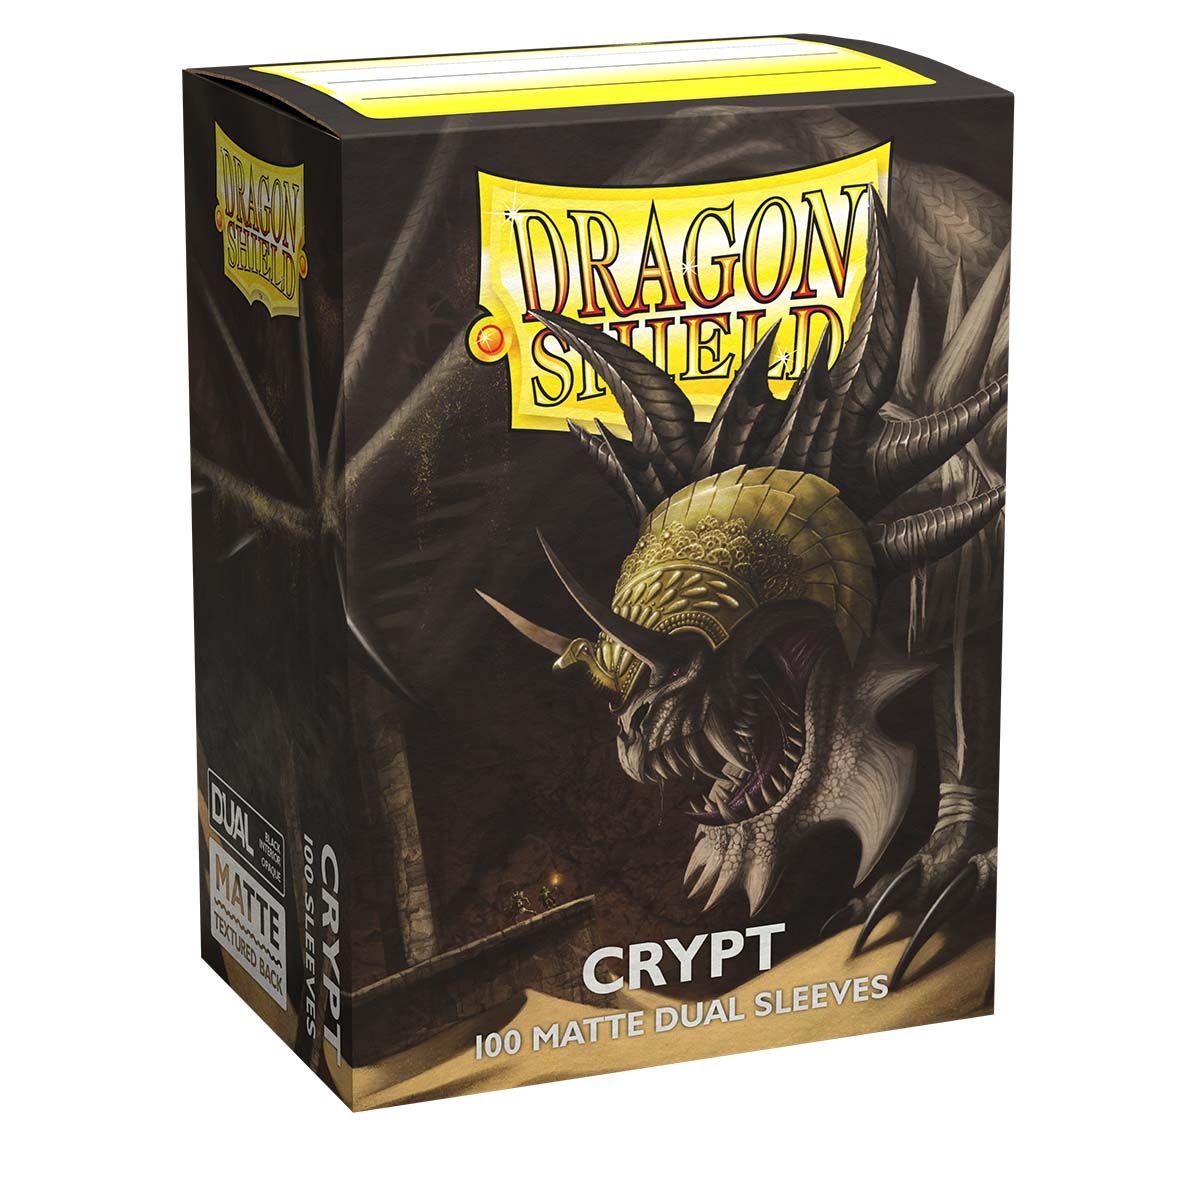 DRAGON SHIELD STANDARD SIZE SLEEVES CRYPT - MATTE DUAL 100CT